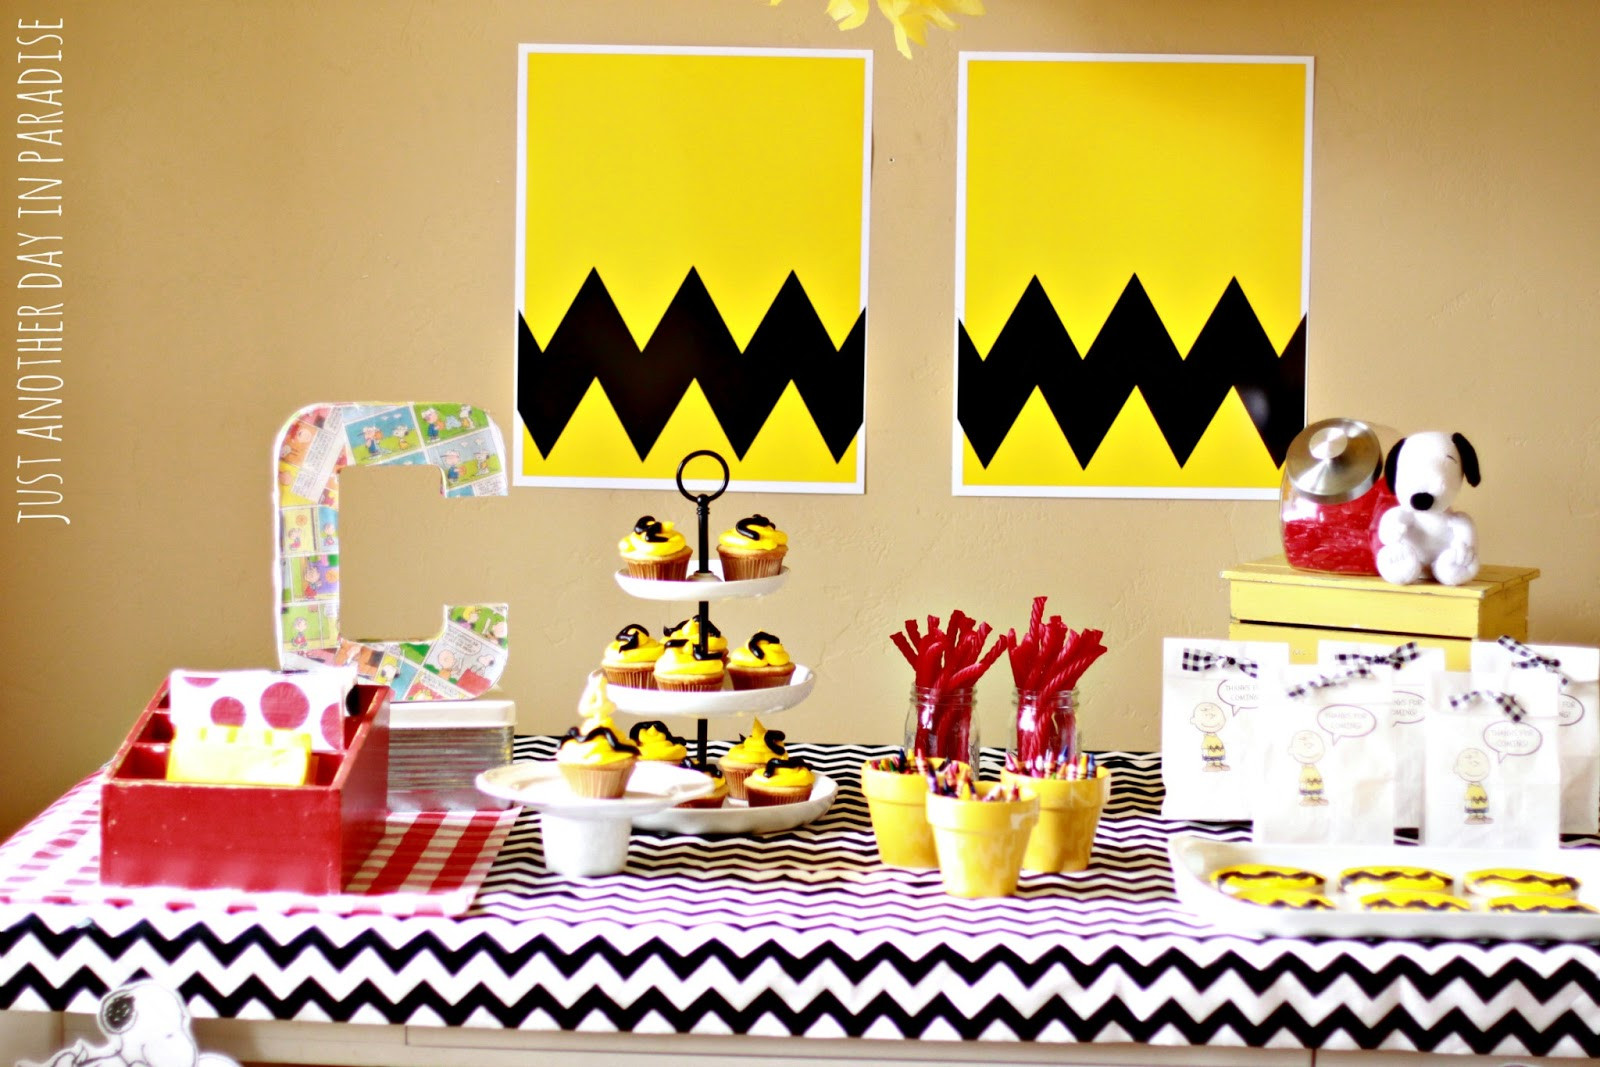 Charlie Brown Birthday Party
 Larissa Another Day A Charlie Brown Birthday Party